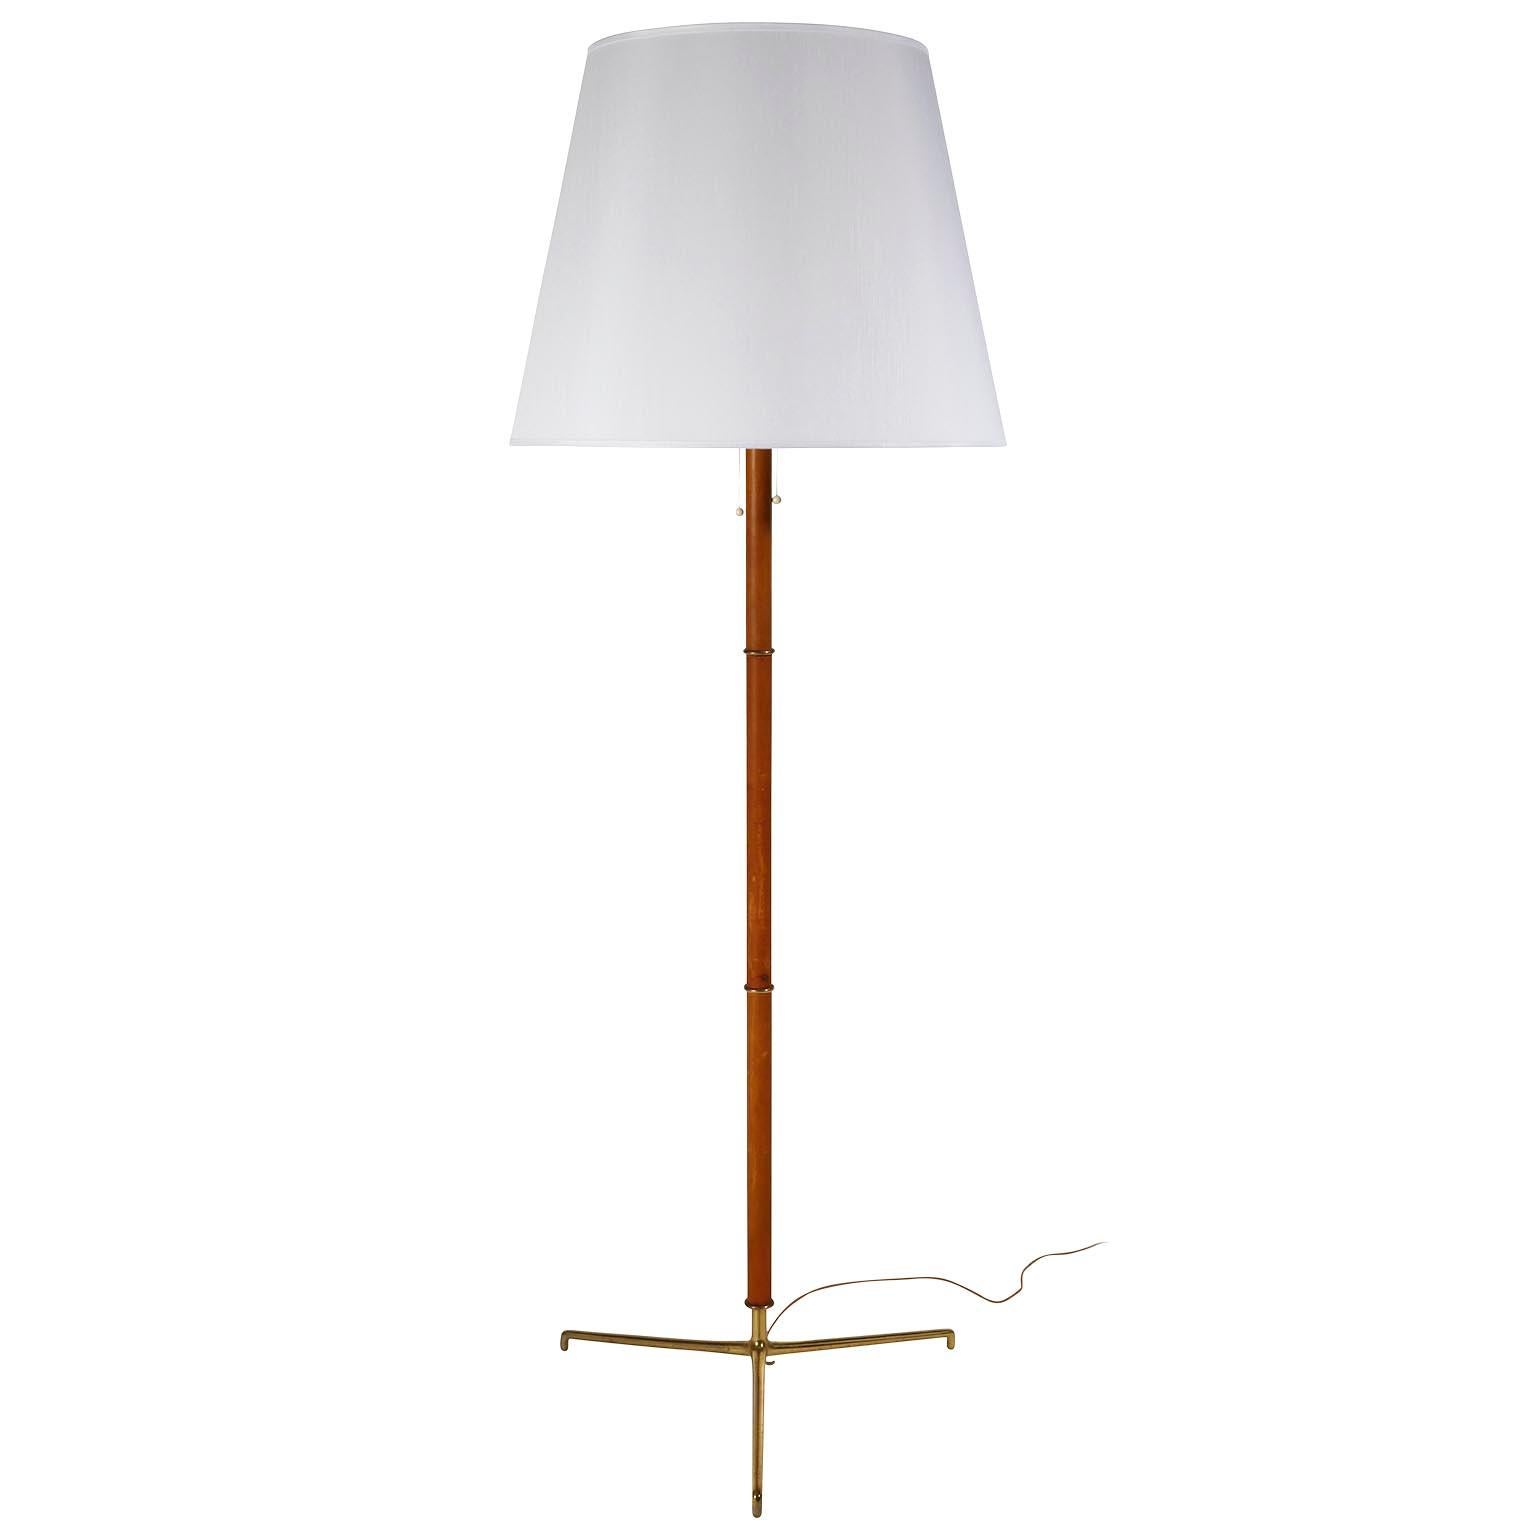 A pair of large brass and leather floor lamps manufactured by J.T. Kalmar in midcentury, circa 1960.
The lamp is a variant of floor lamp model 'Helios' no. 2035 and model 'Bambo' no. 2011. The lights are documented in the Kalmar catalogue from the